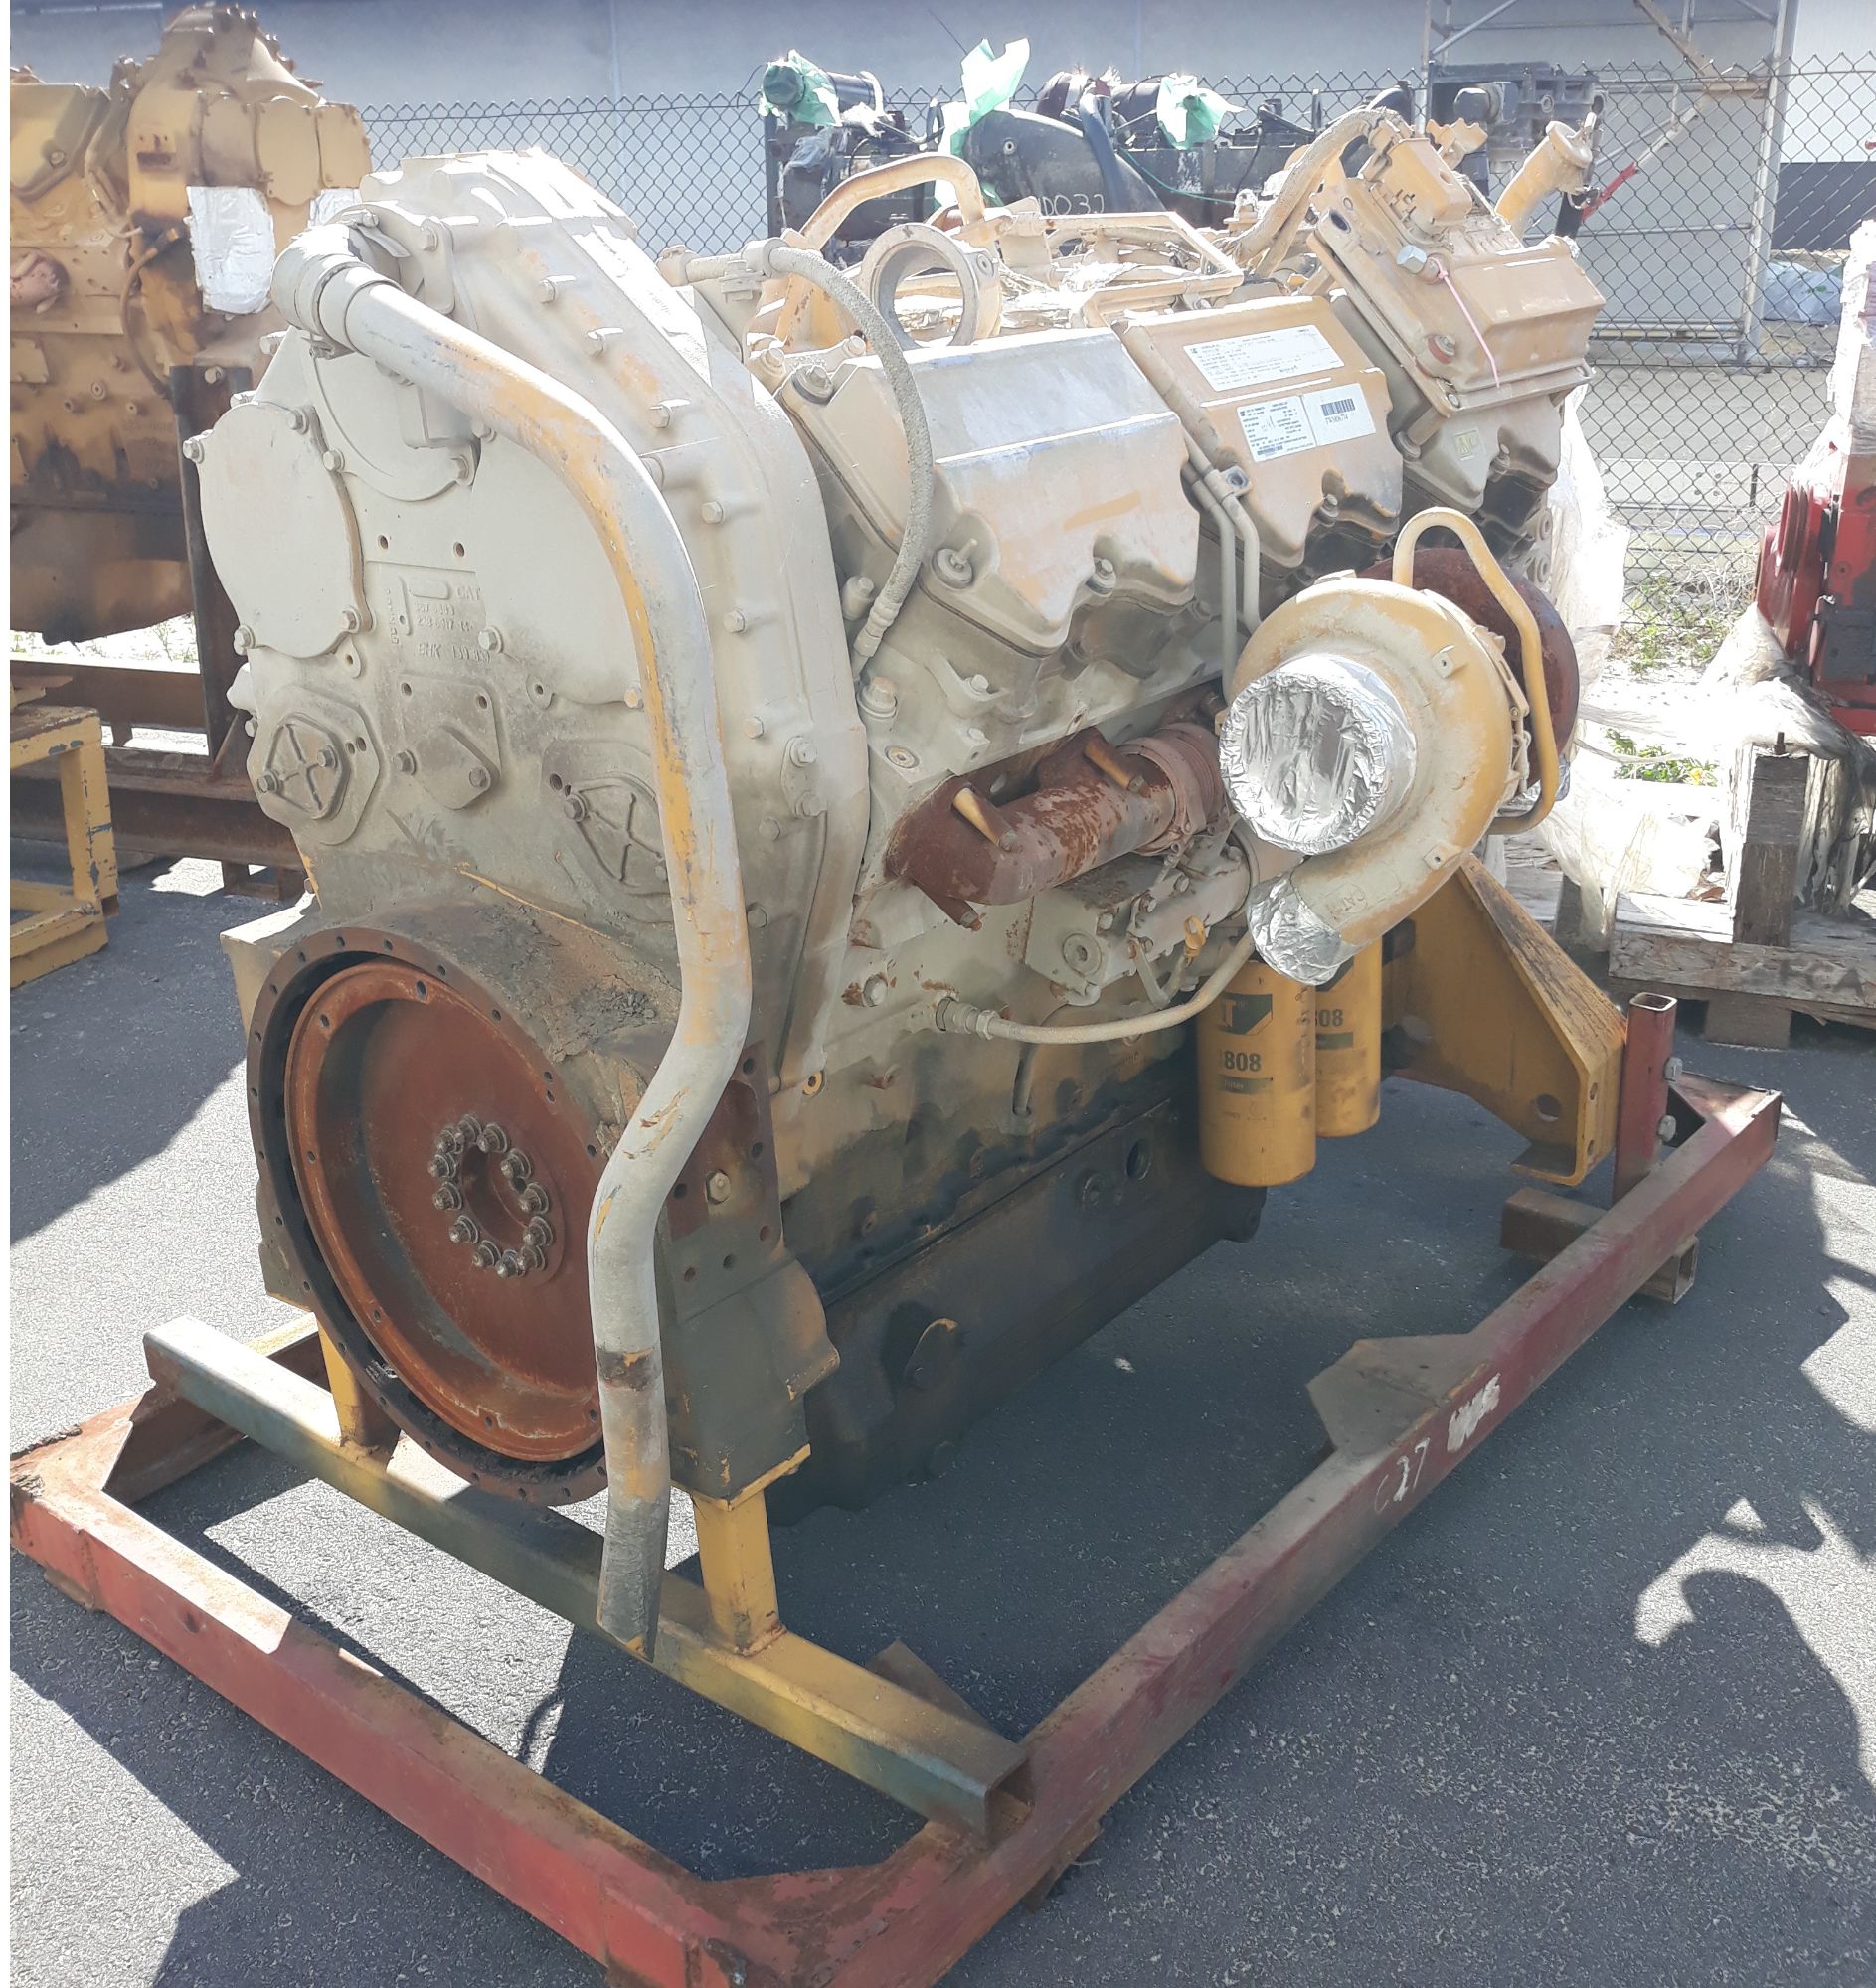 CaterpillarÂ® C27 Engines dismantled and used parts now available for sale throughout Australia